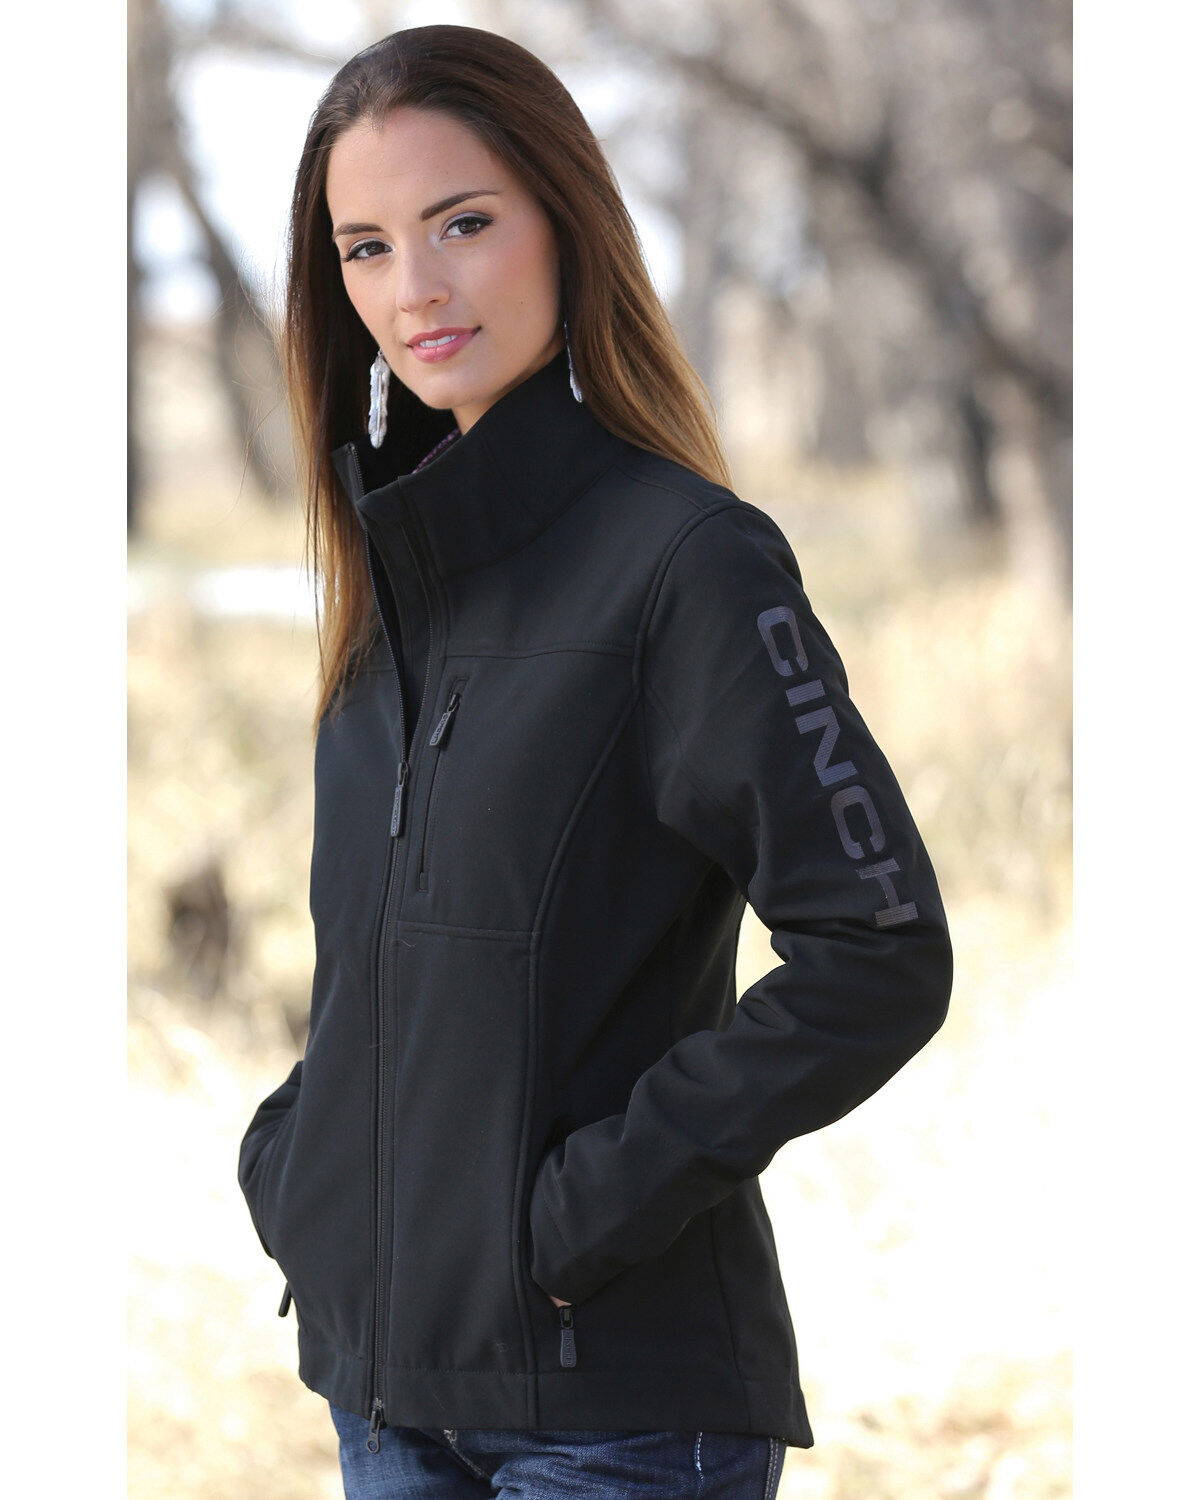 Cinch Women's Black Concealed Carry 